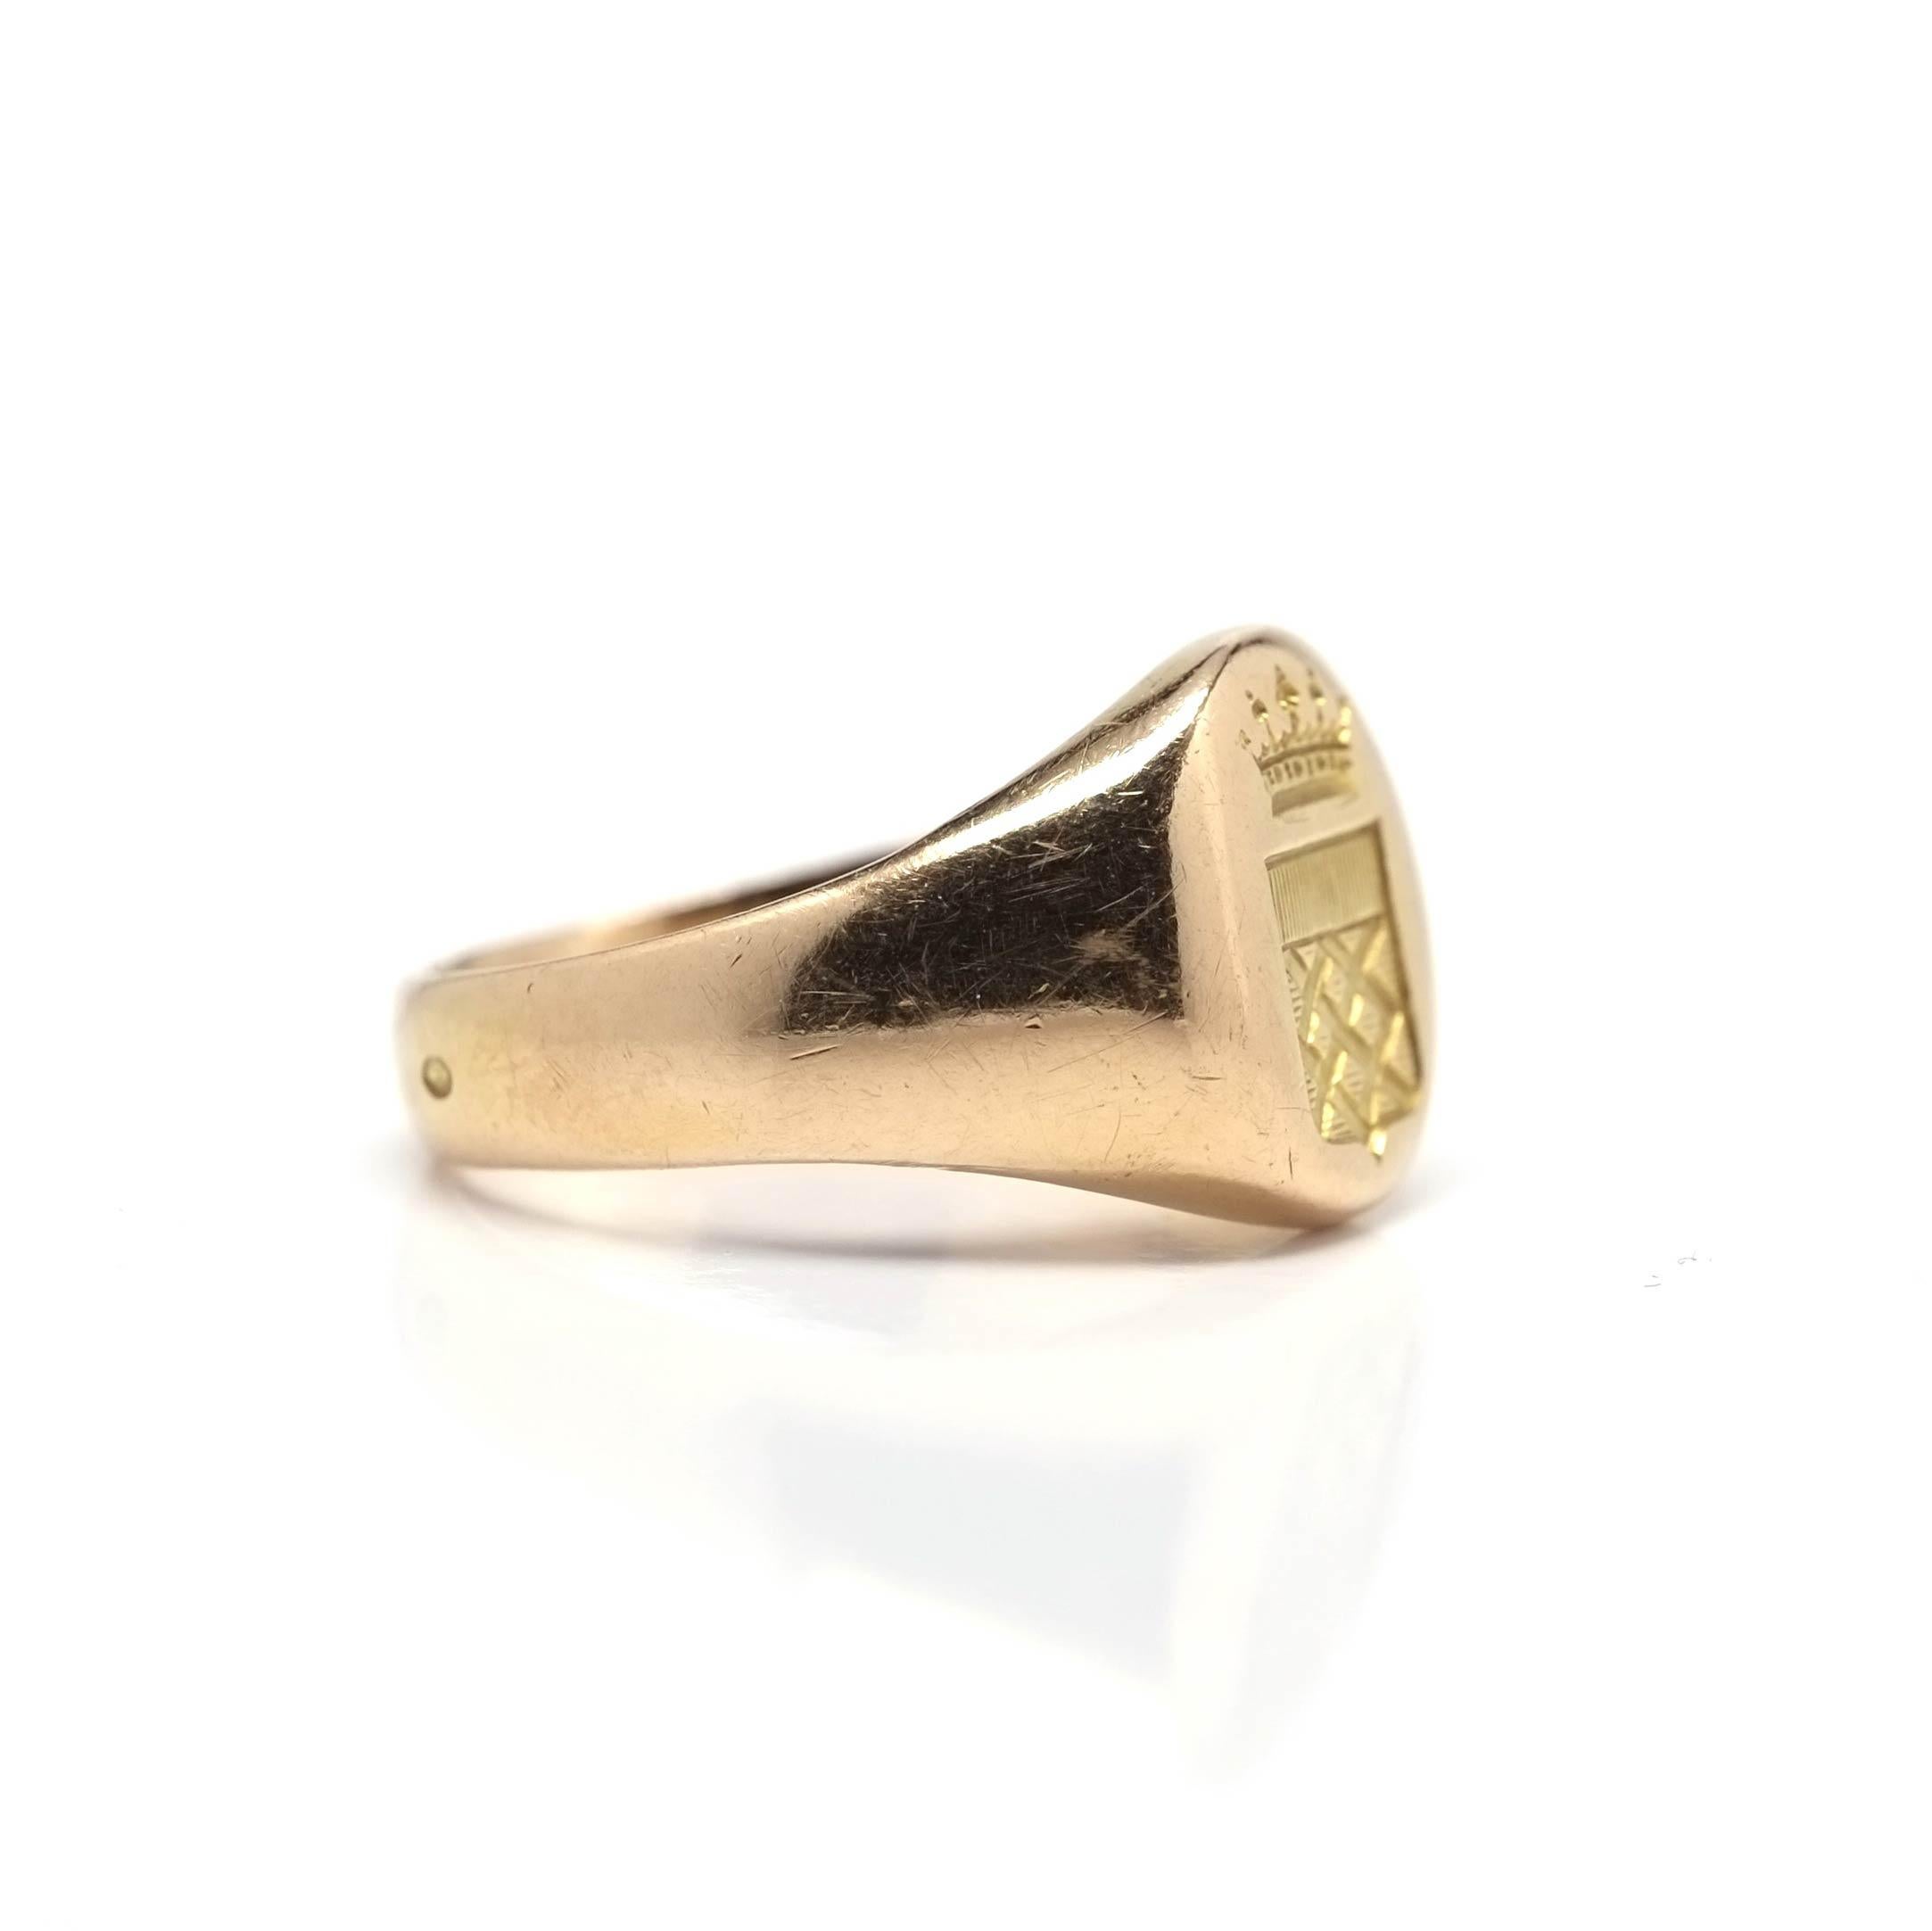 Vintage hand-engraved signet ring in yellow gold, created in France as testified by the owl shaped stamp. Ready to become the protagonist of new stories, its solid structure makes it easily wearable to enrich everyday life with its unrepeatable